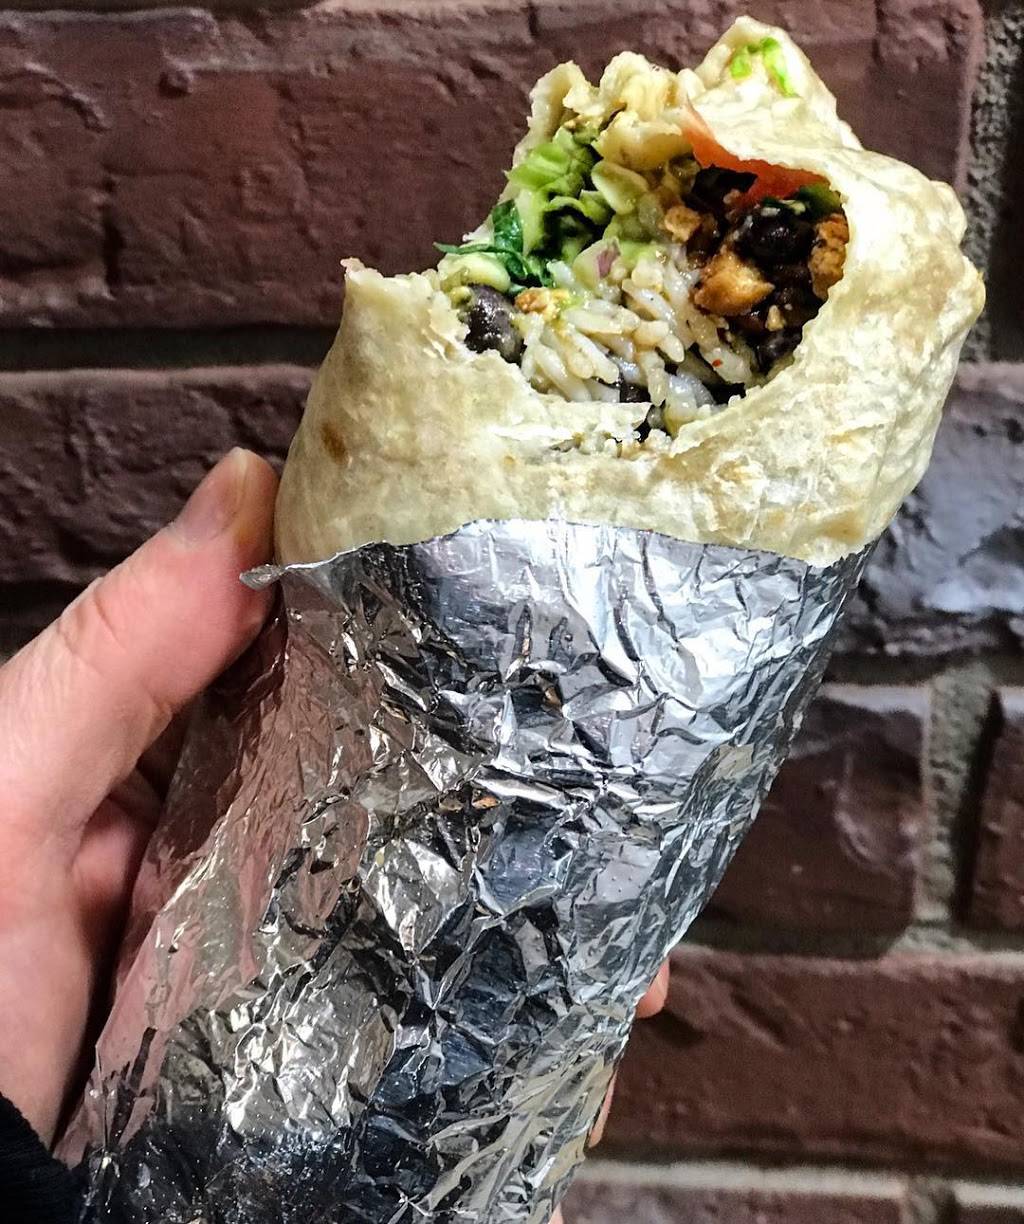 Chipotle Mexican Grill | restaurant | 2843 Broadway, New York, NY 10025, USA | 2122221712 OR +1 212-222-1712